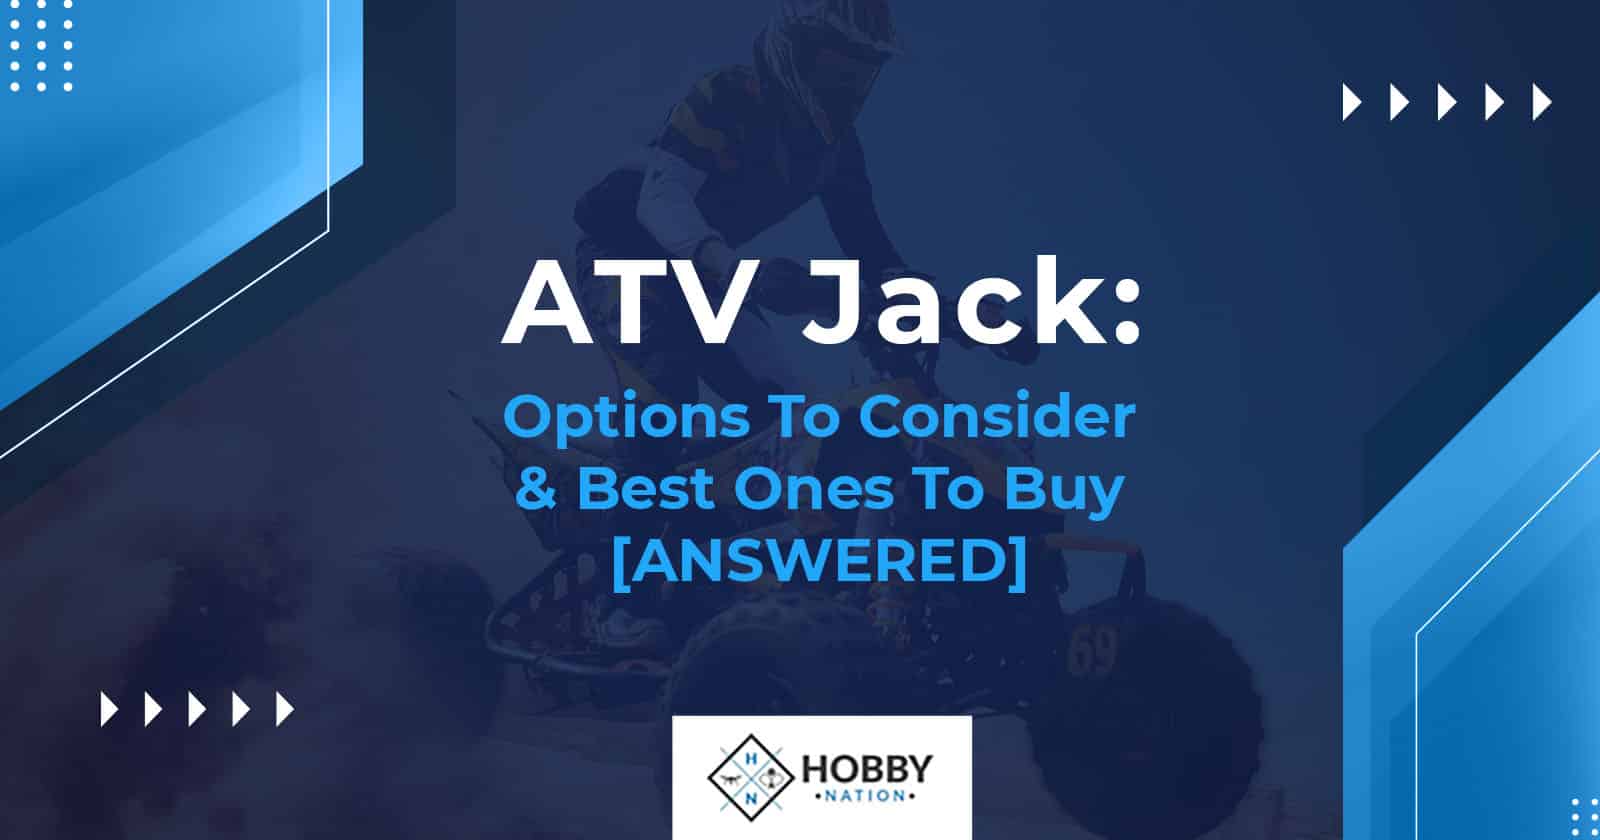 ATV Jack: Options To Consider & Best Ones To Buy